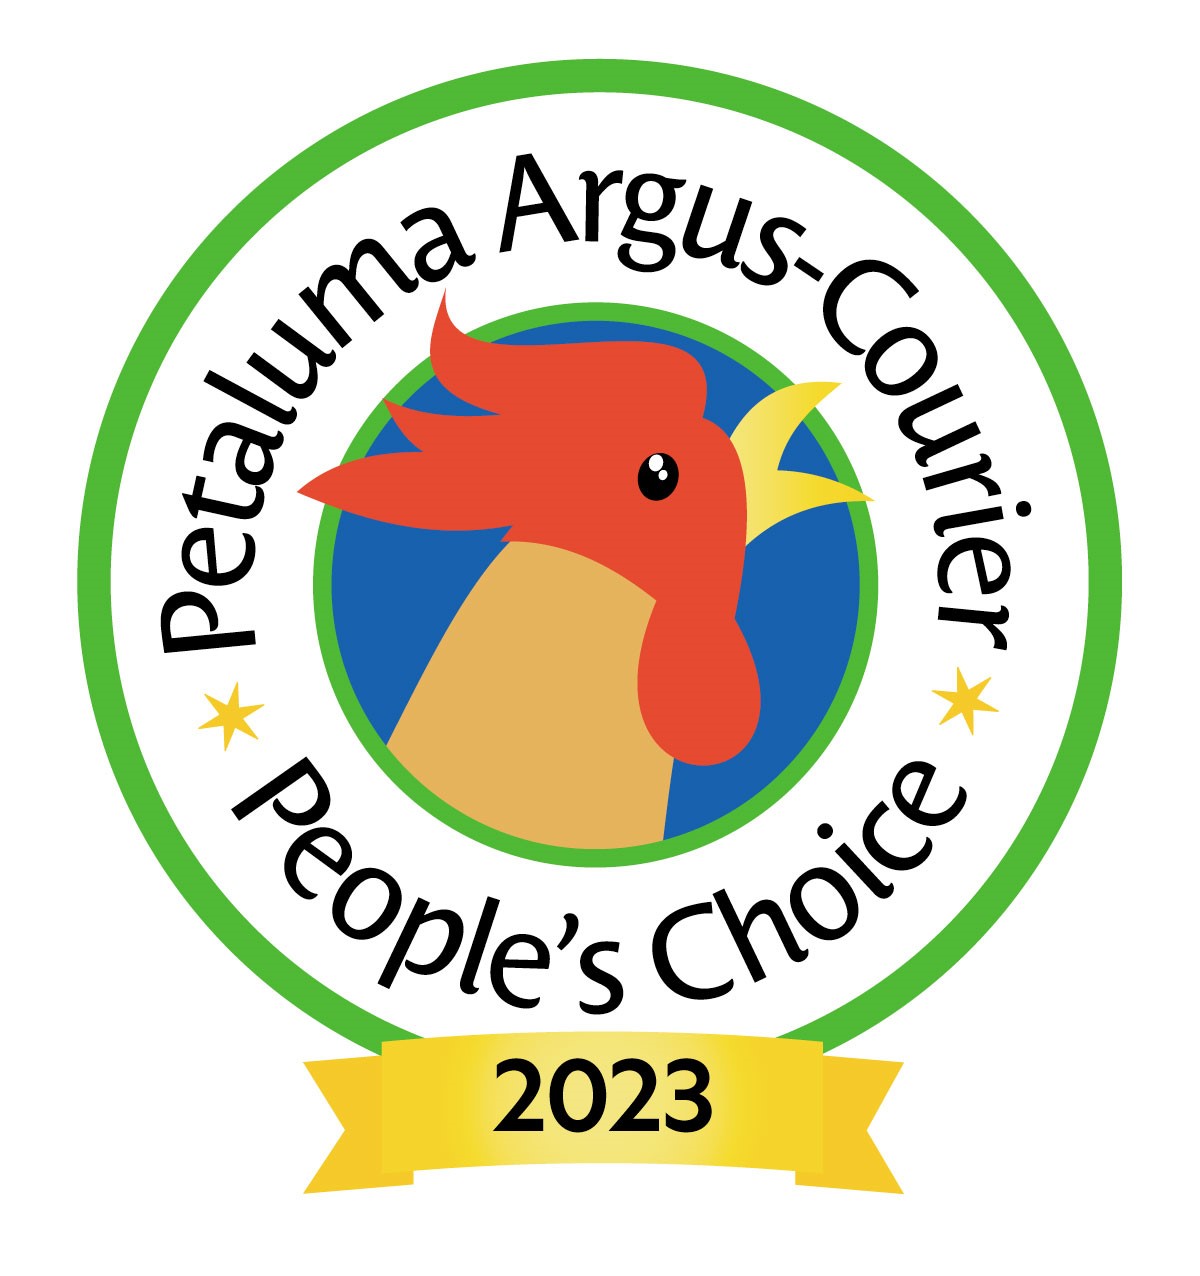 Peoples Choice Award for 2023 Logo